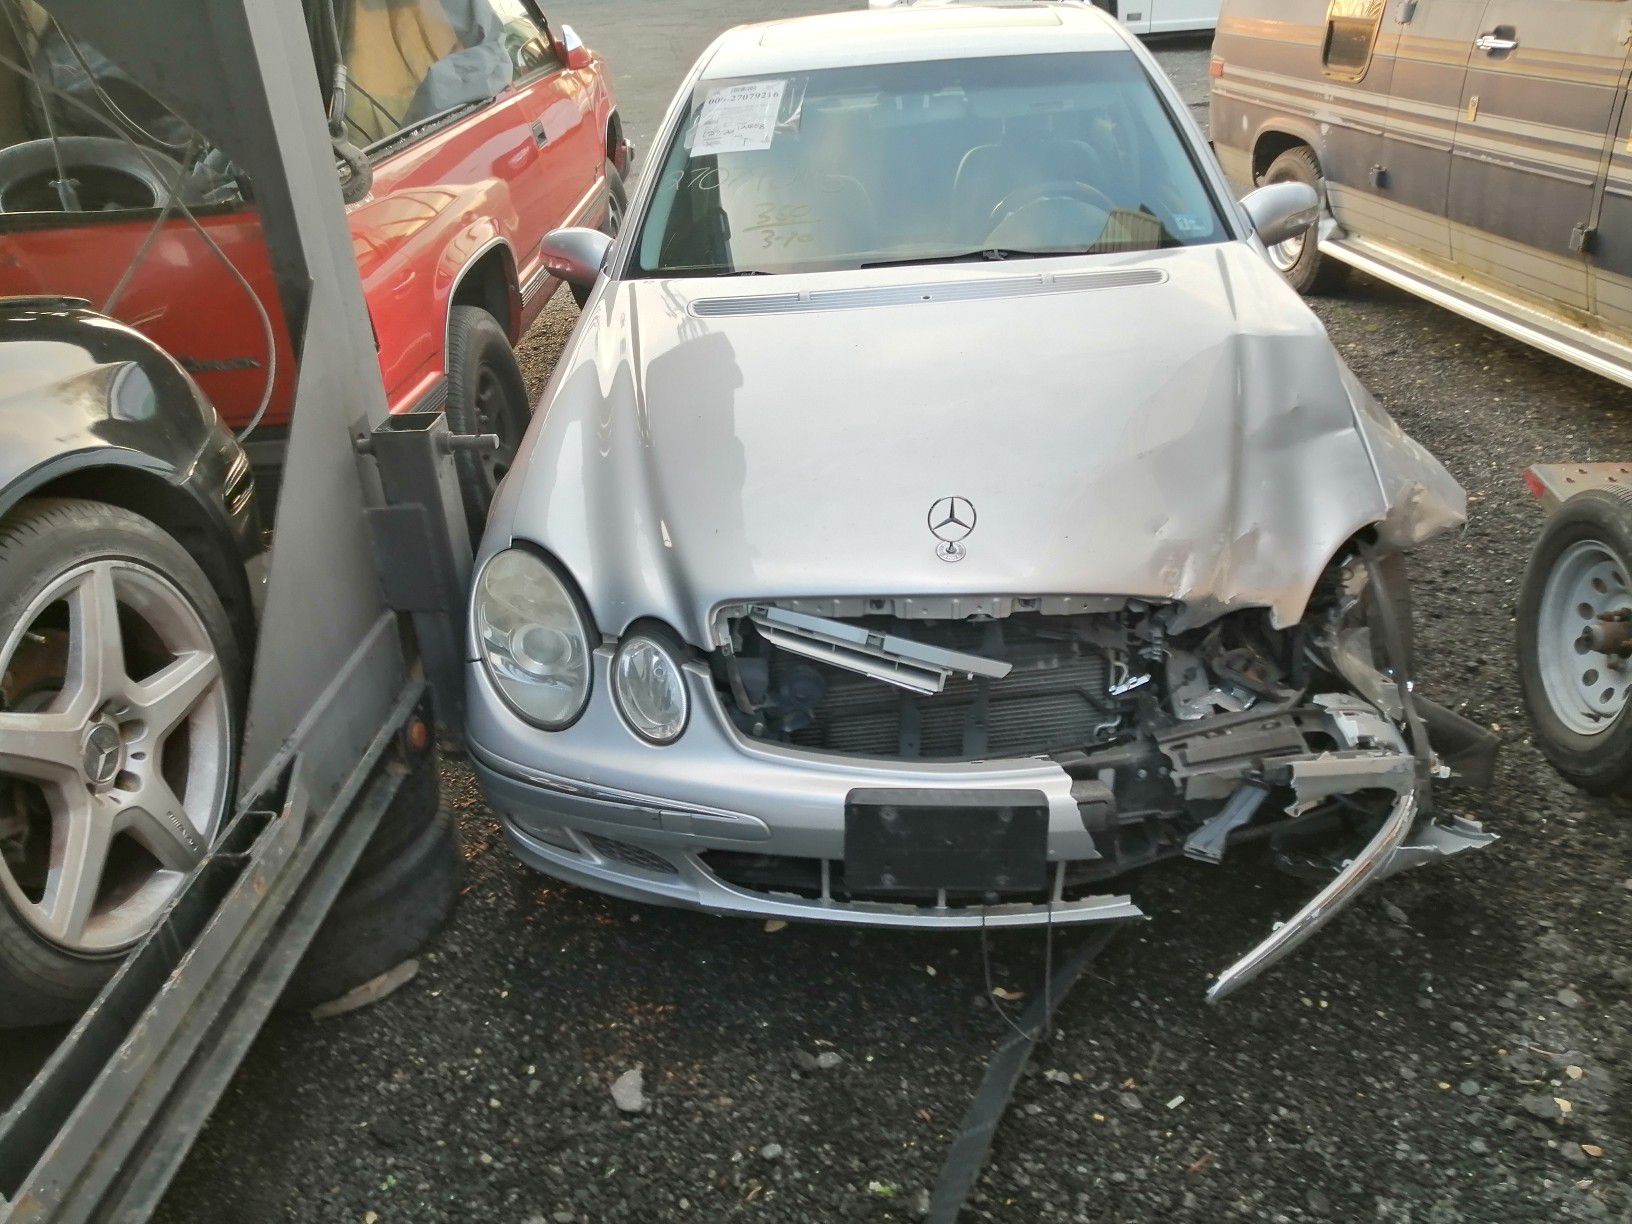 06 Mercedes e350 for parts what part you need